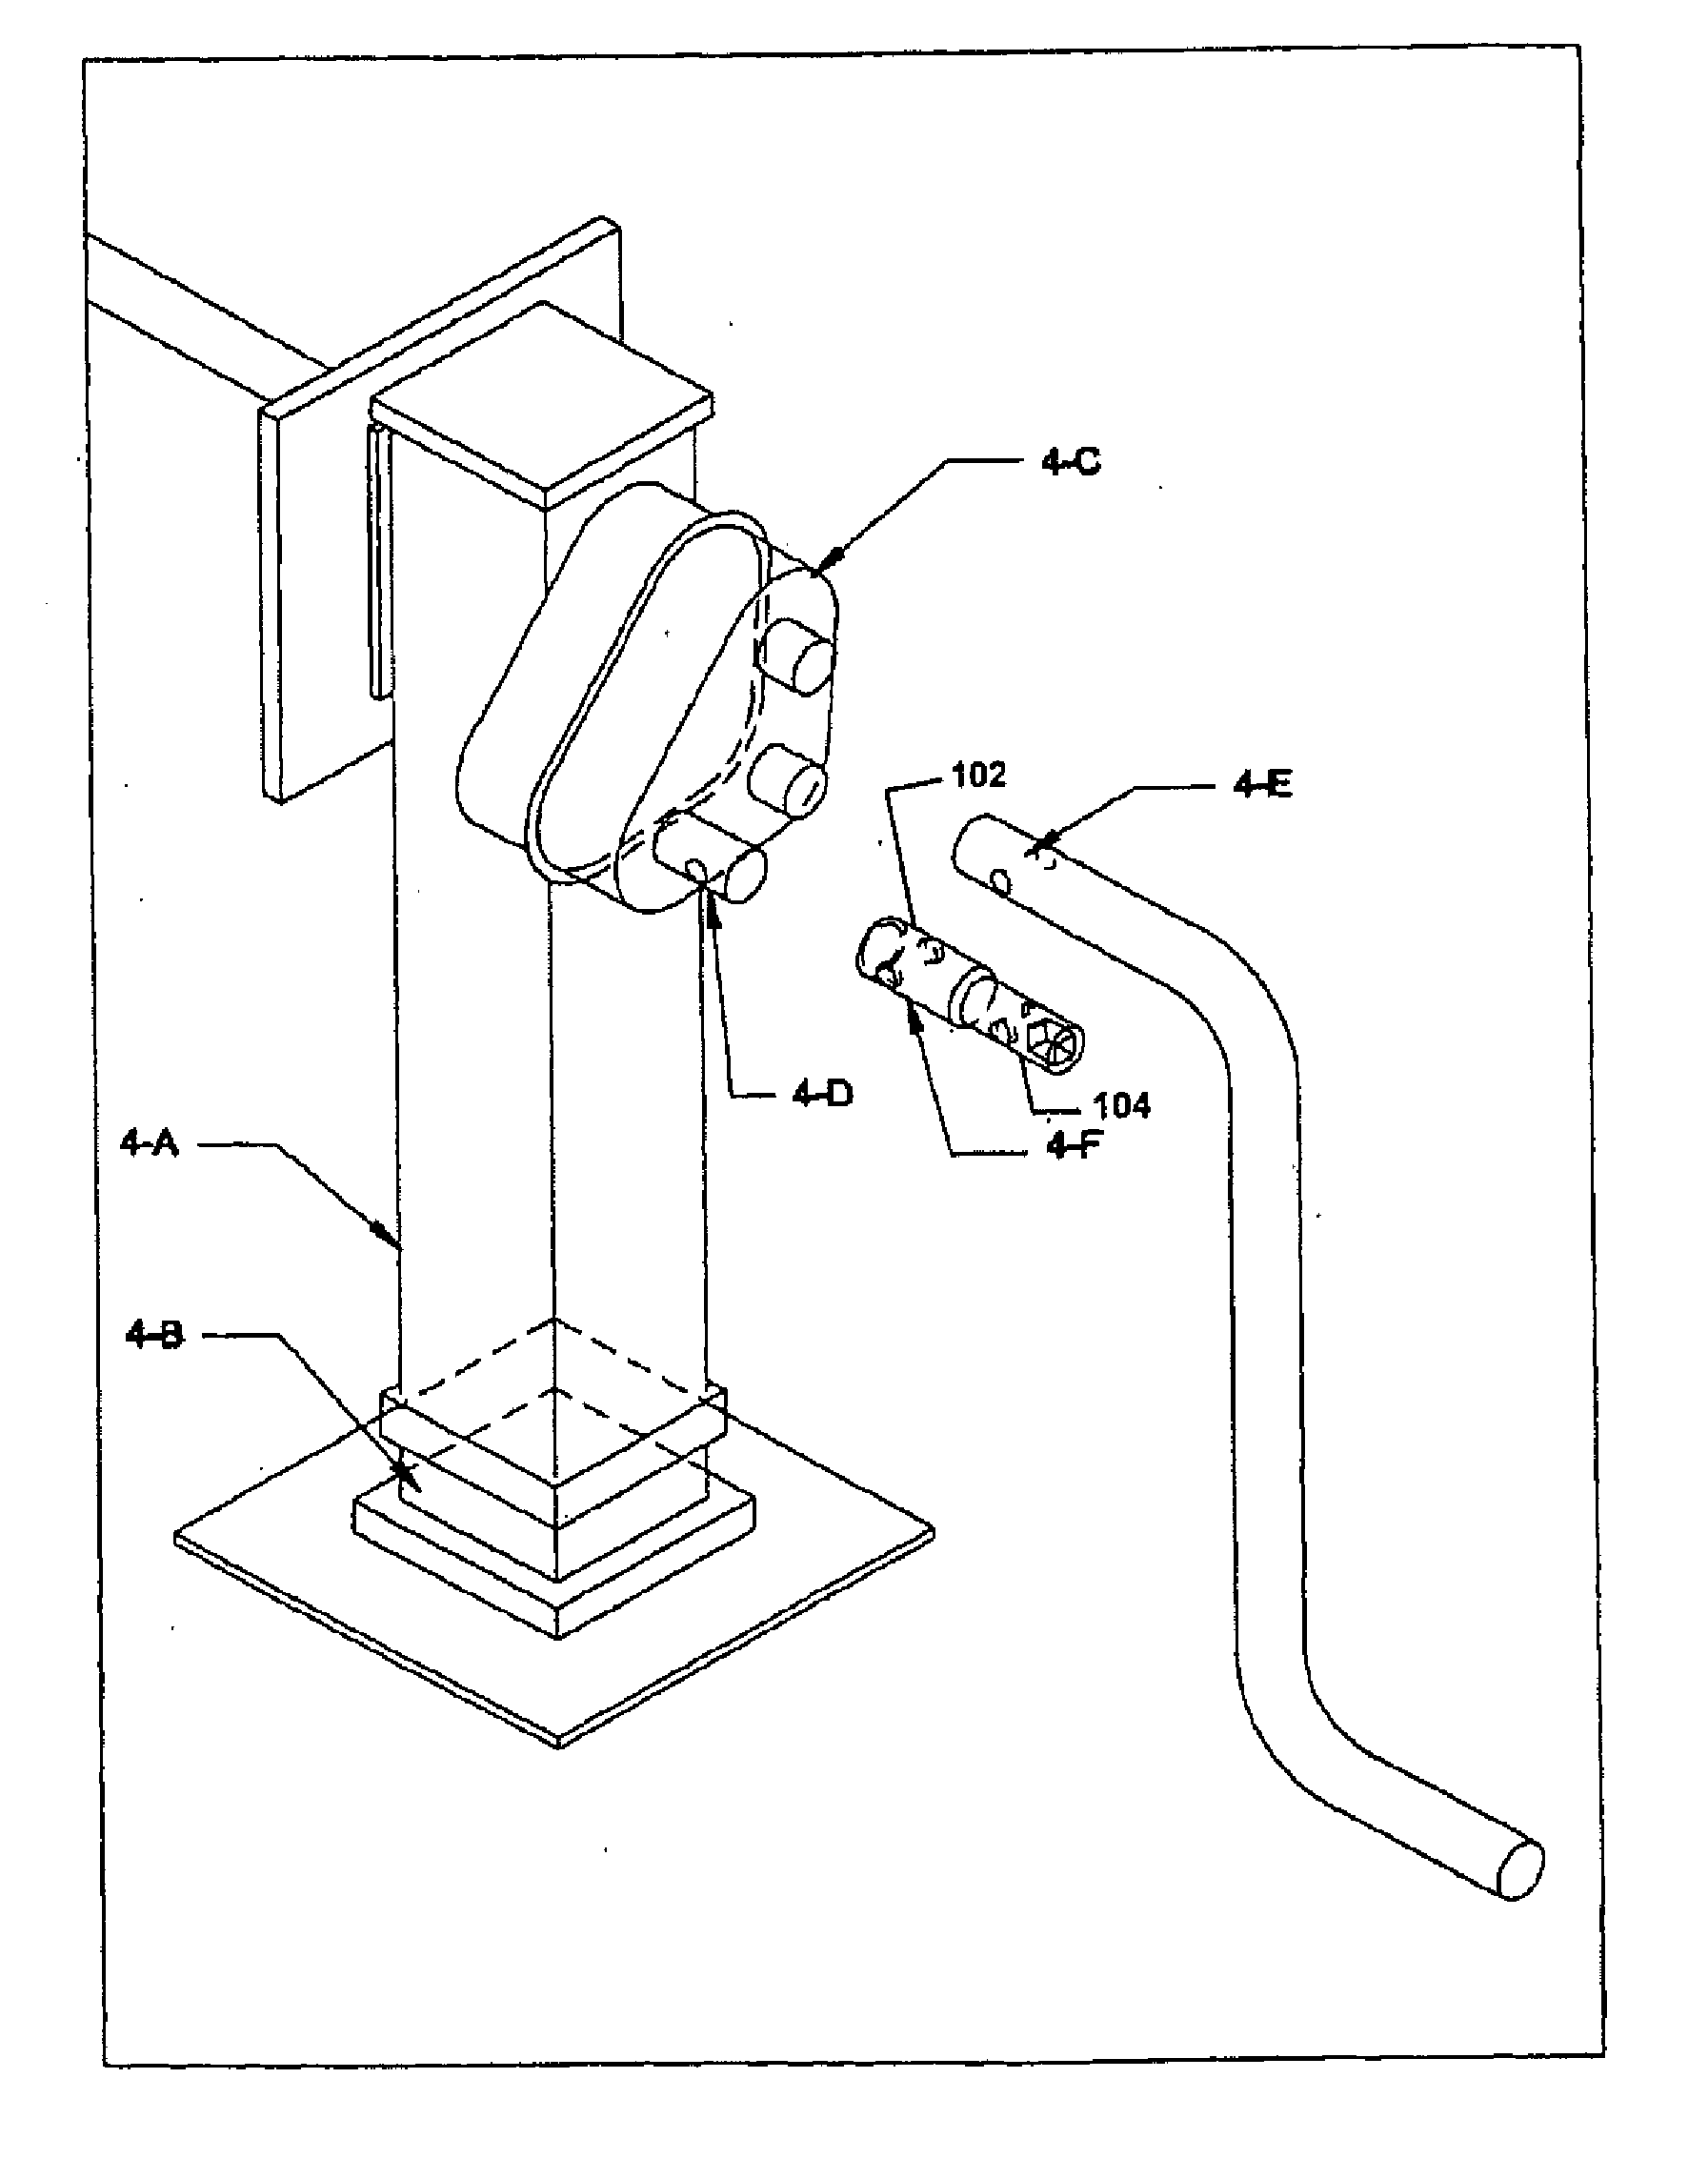 System and device for mechanically extending and retracting landing gear of a semitrailer or a chassis